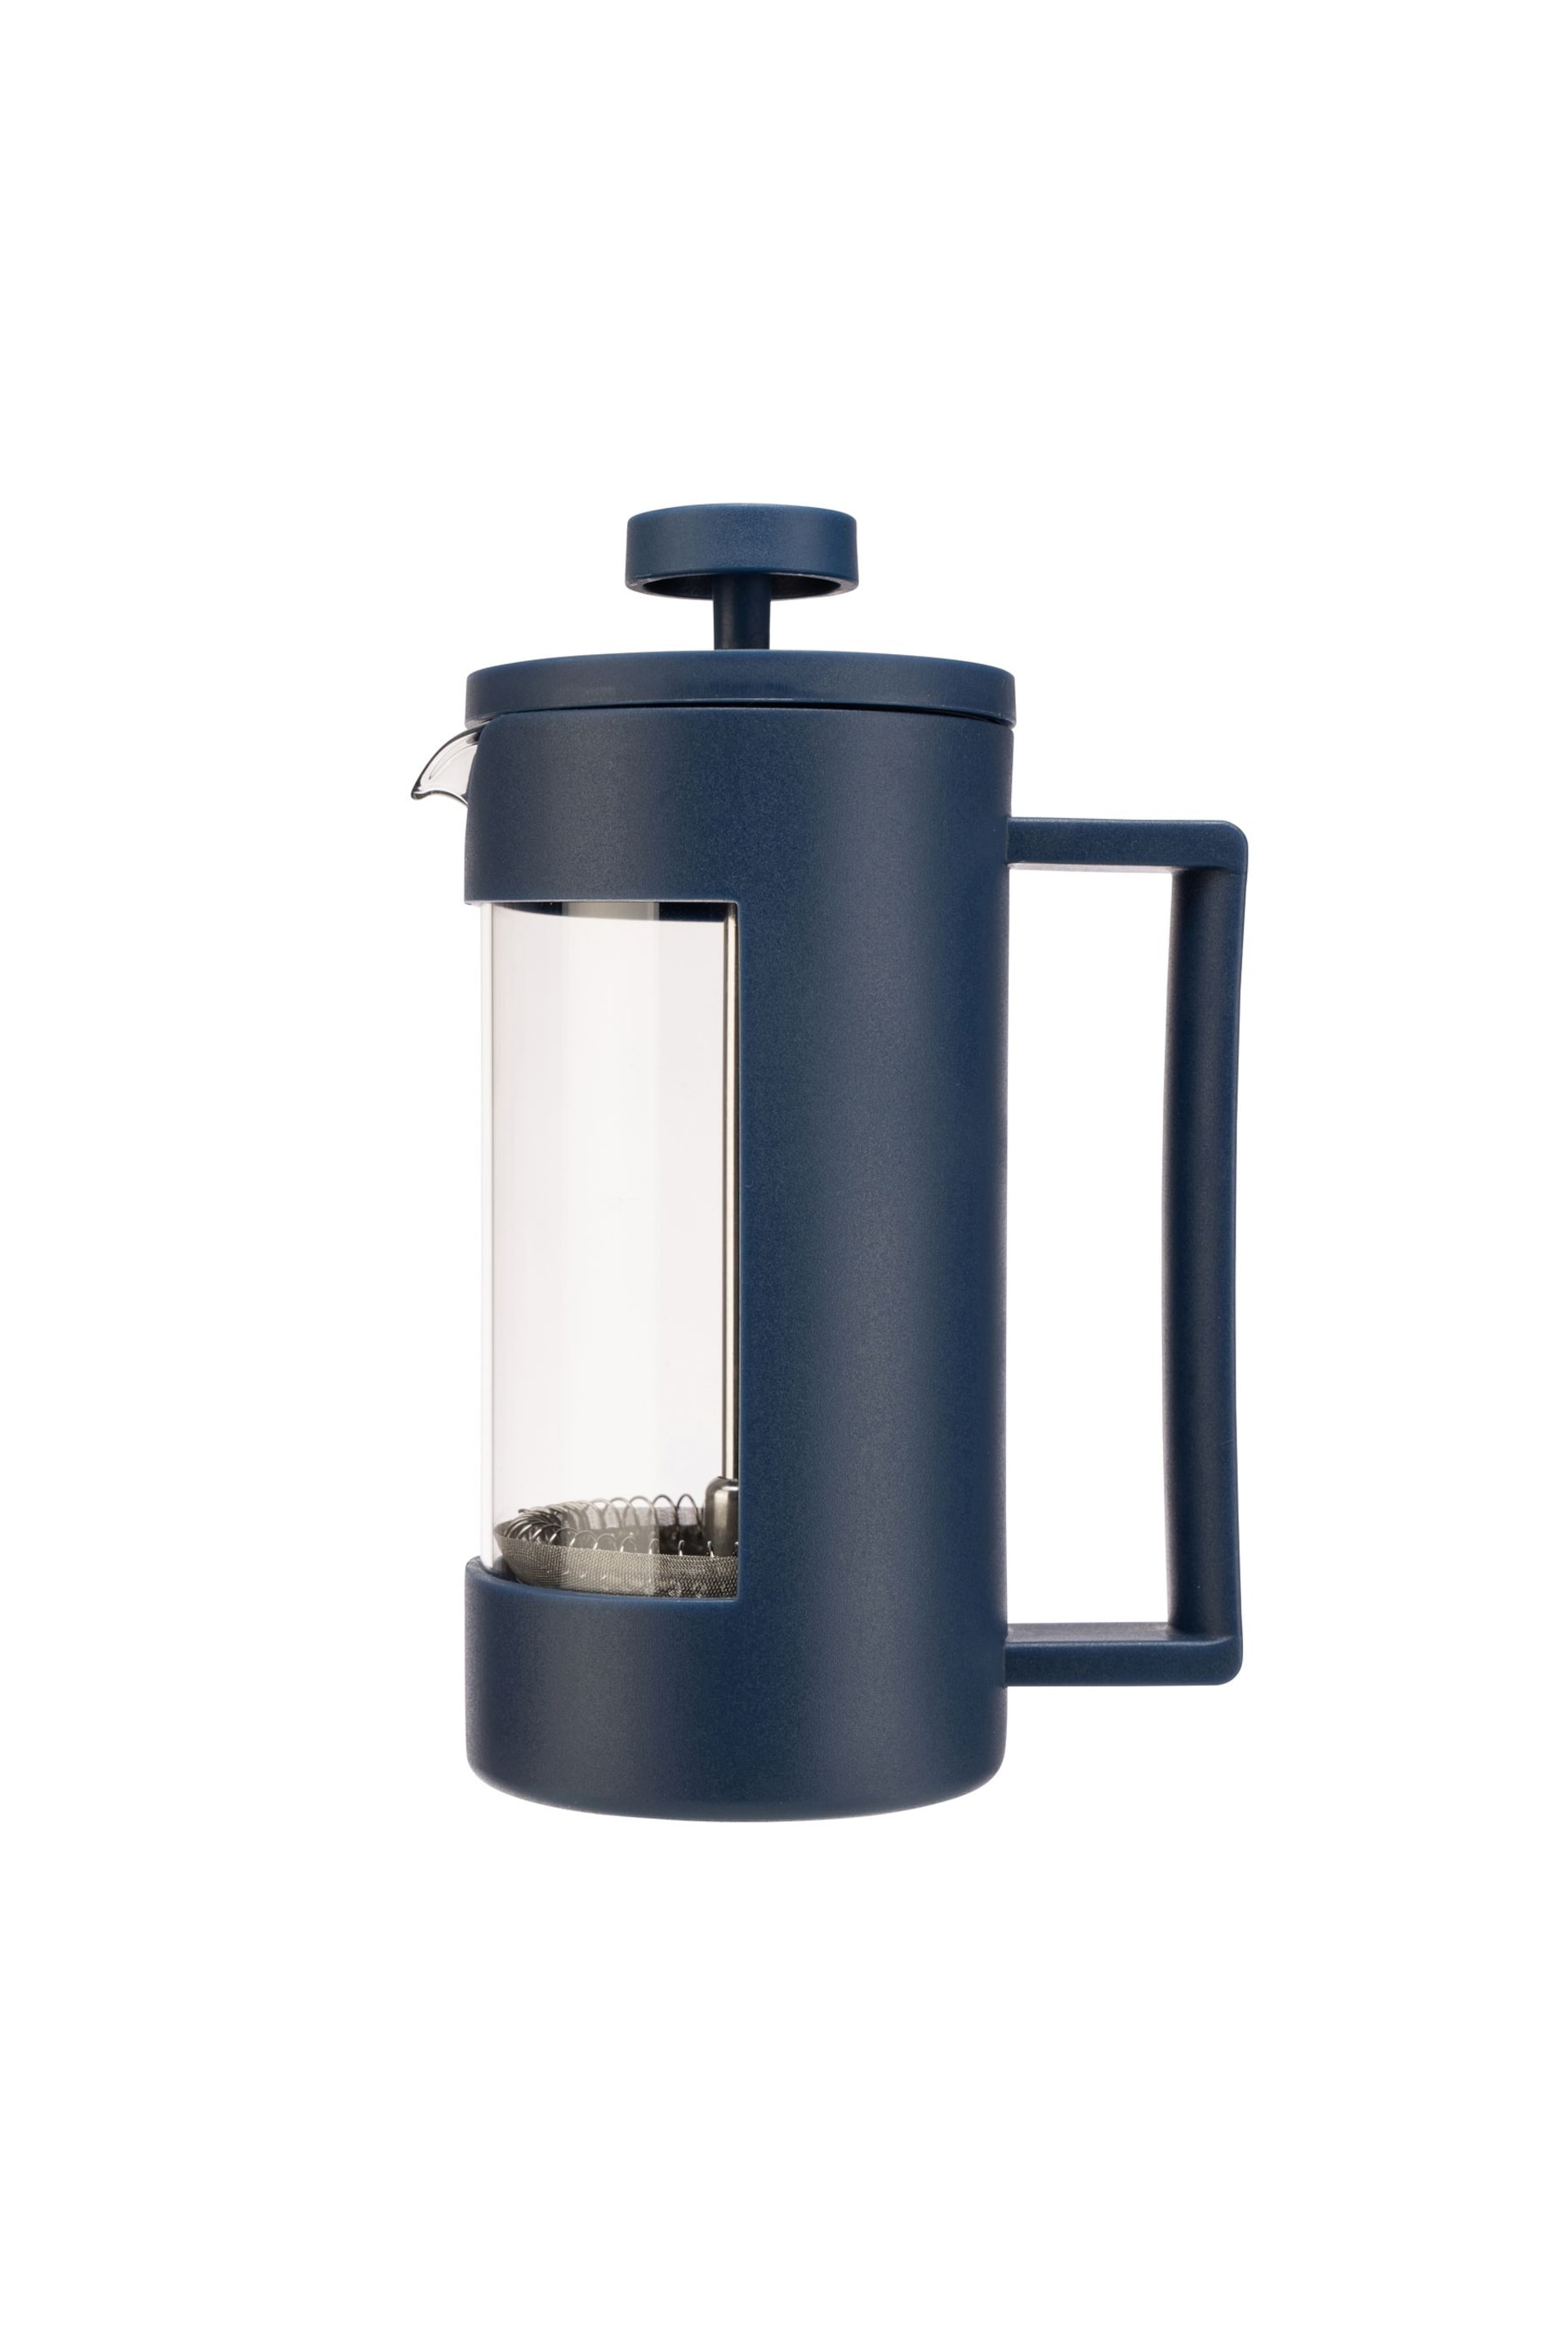 SIIP Blue 3 Cup Cafetiere - Image 2 of 4